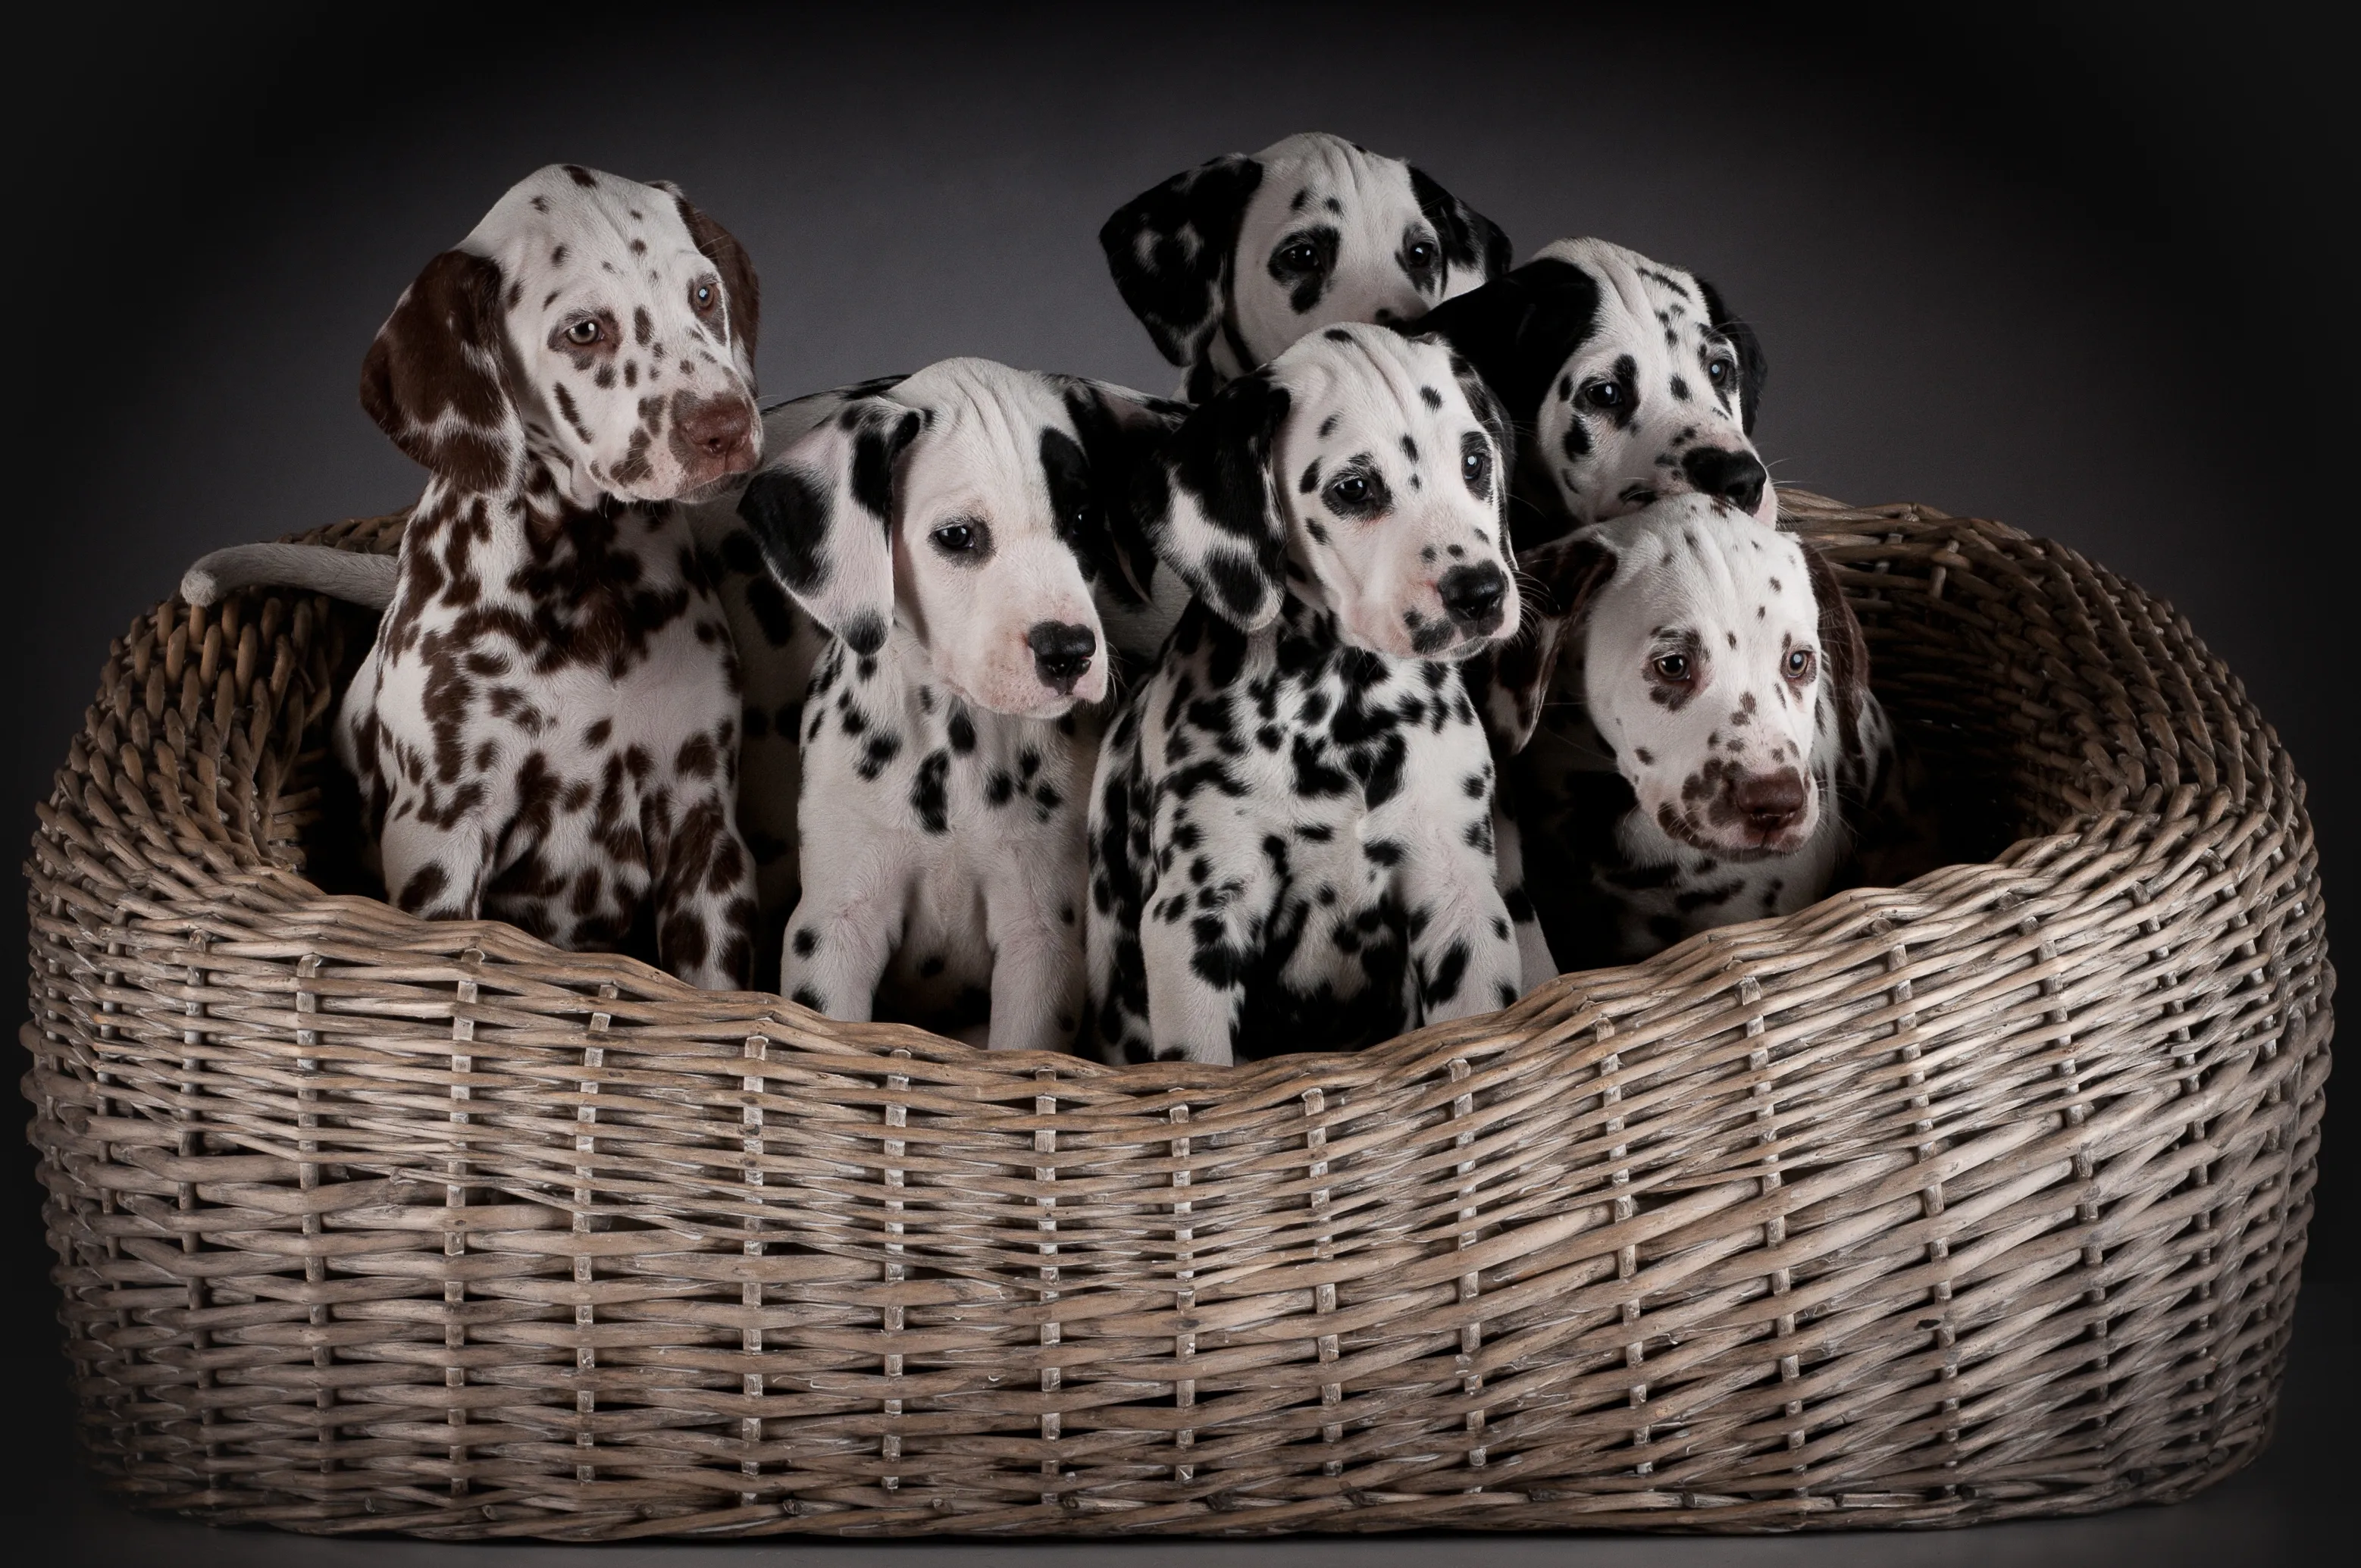 Dalmatian puppies in a basket